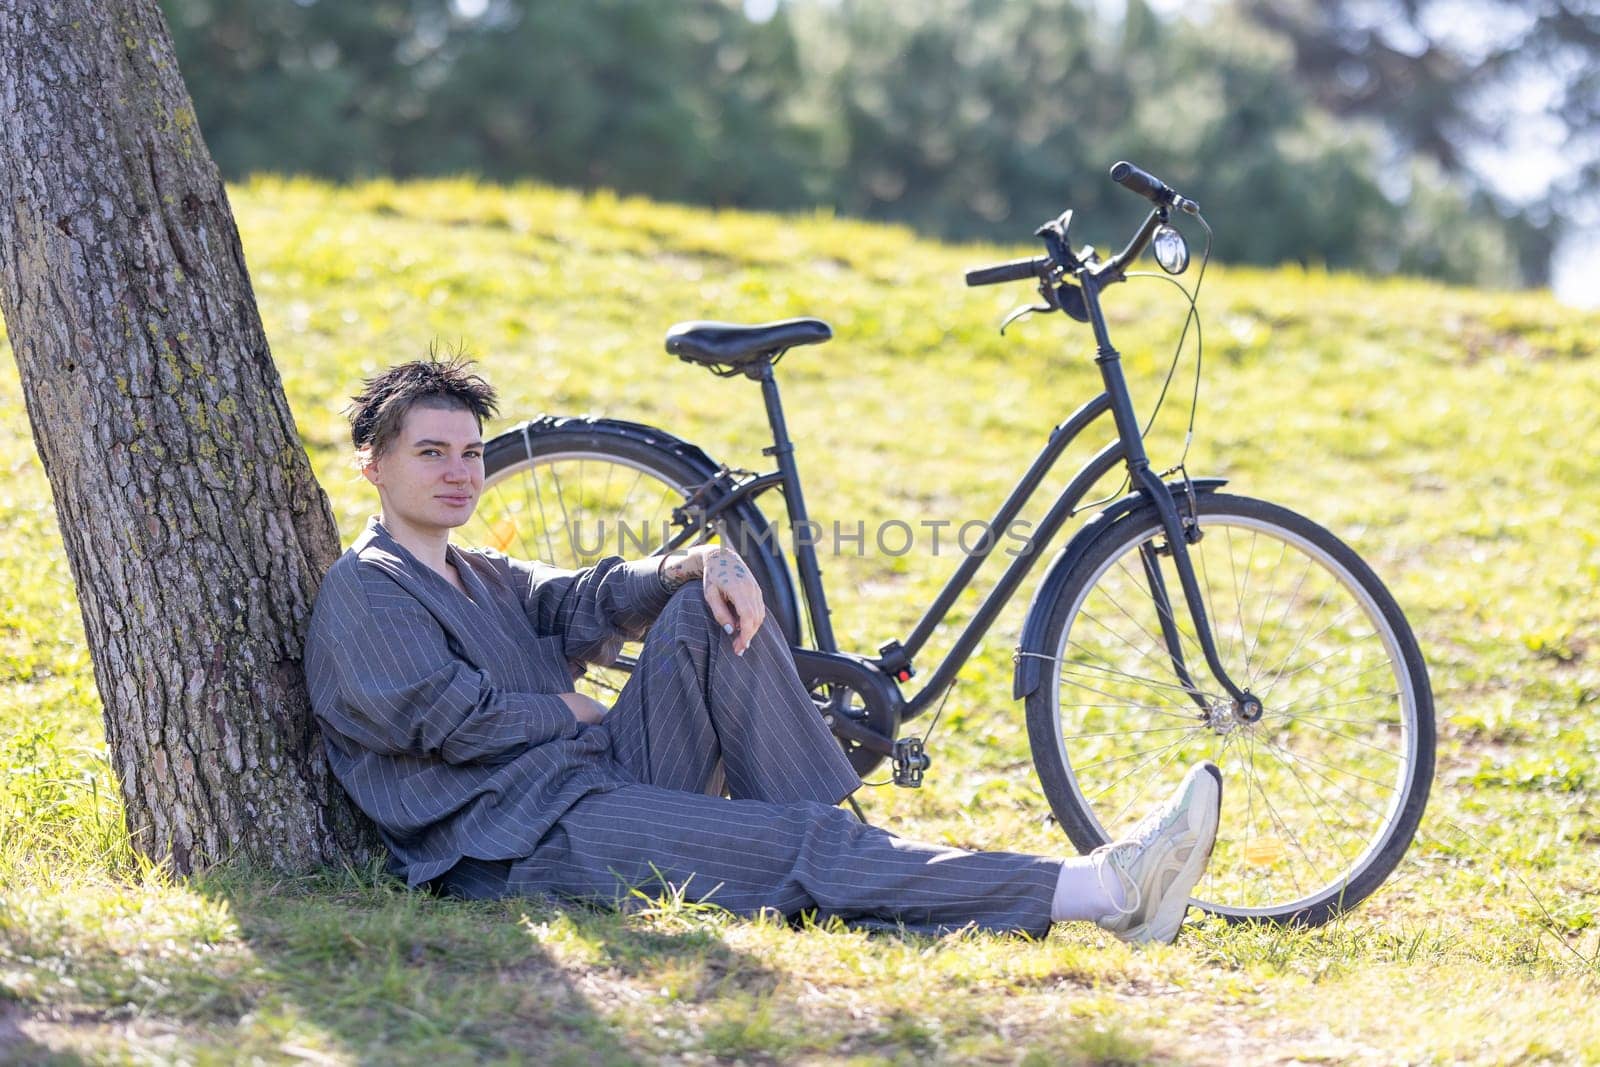 A woman is sitting on the grass next to a bicycle. He is wearing a black shirt and pants